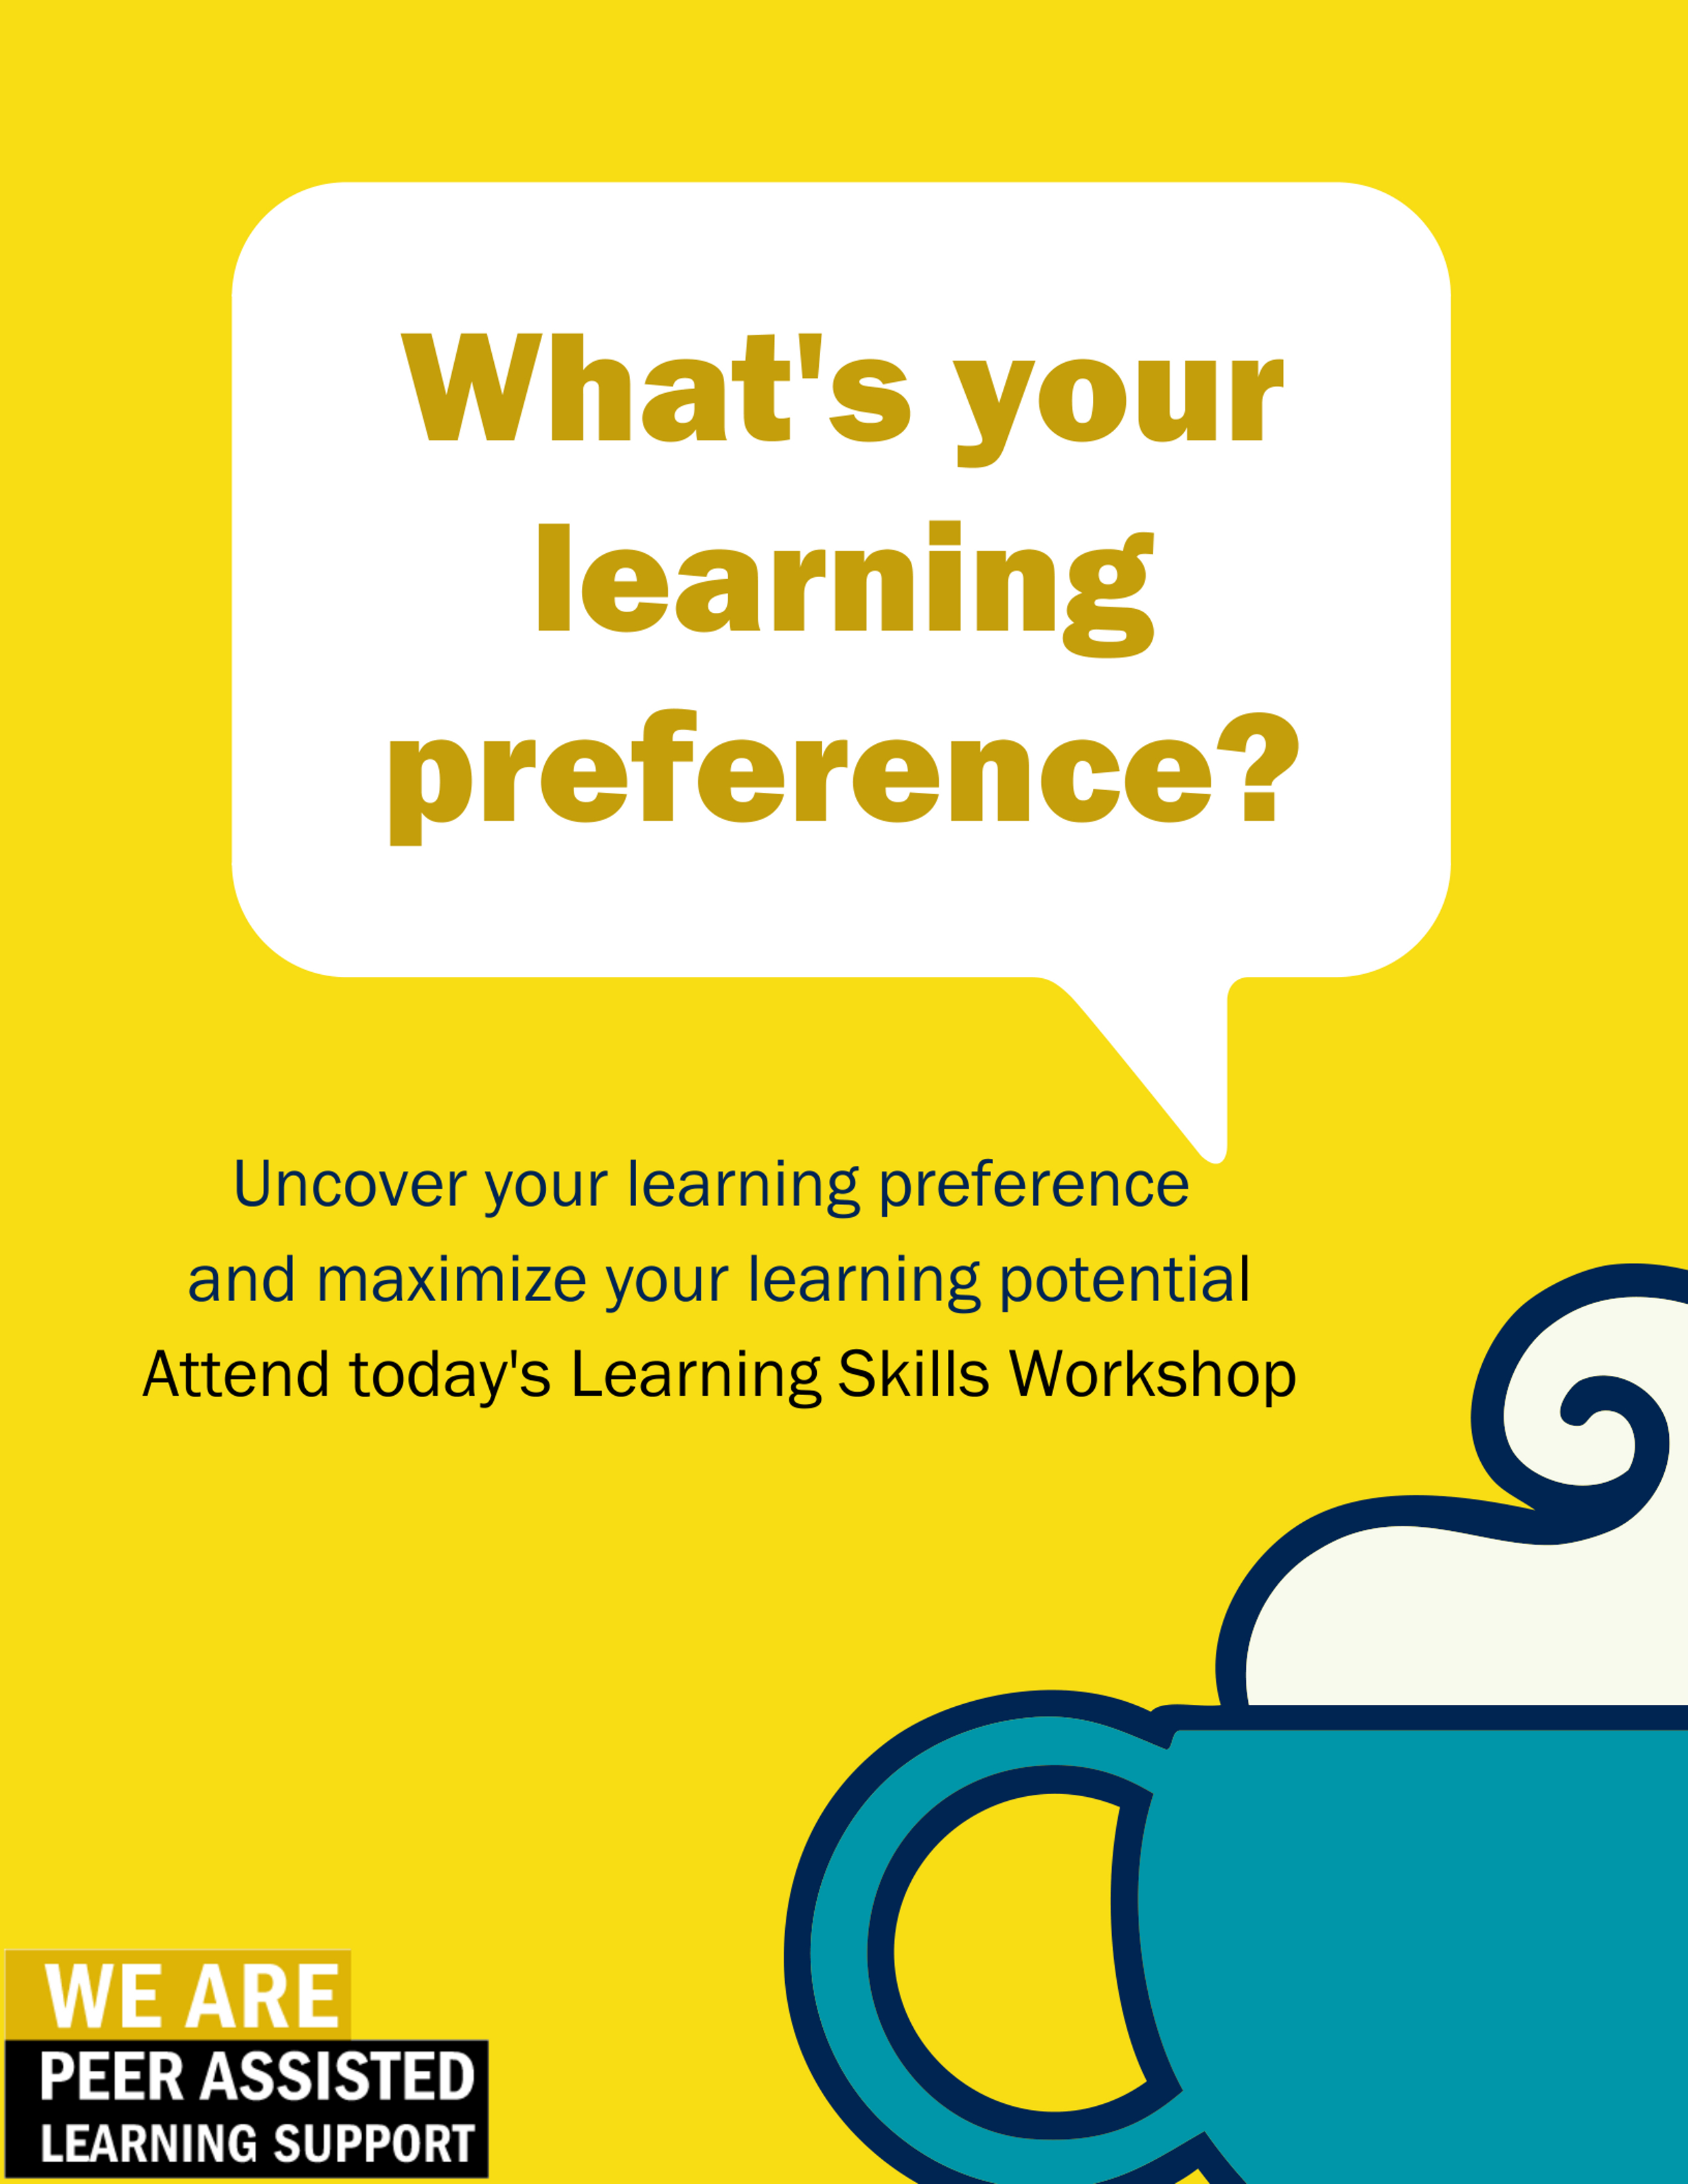 Whats your learning preference? Attend this learning skills workshop to maximize your potential!